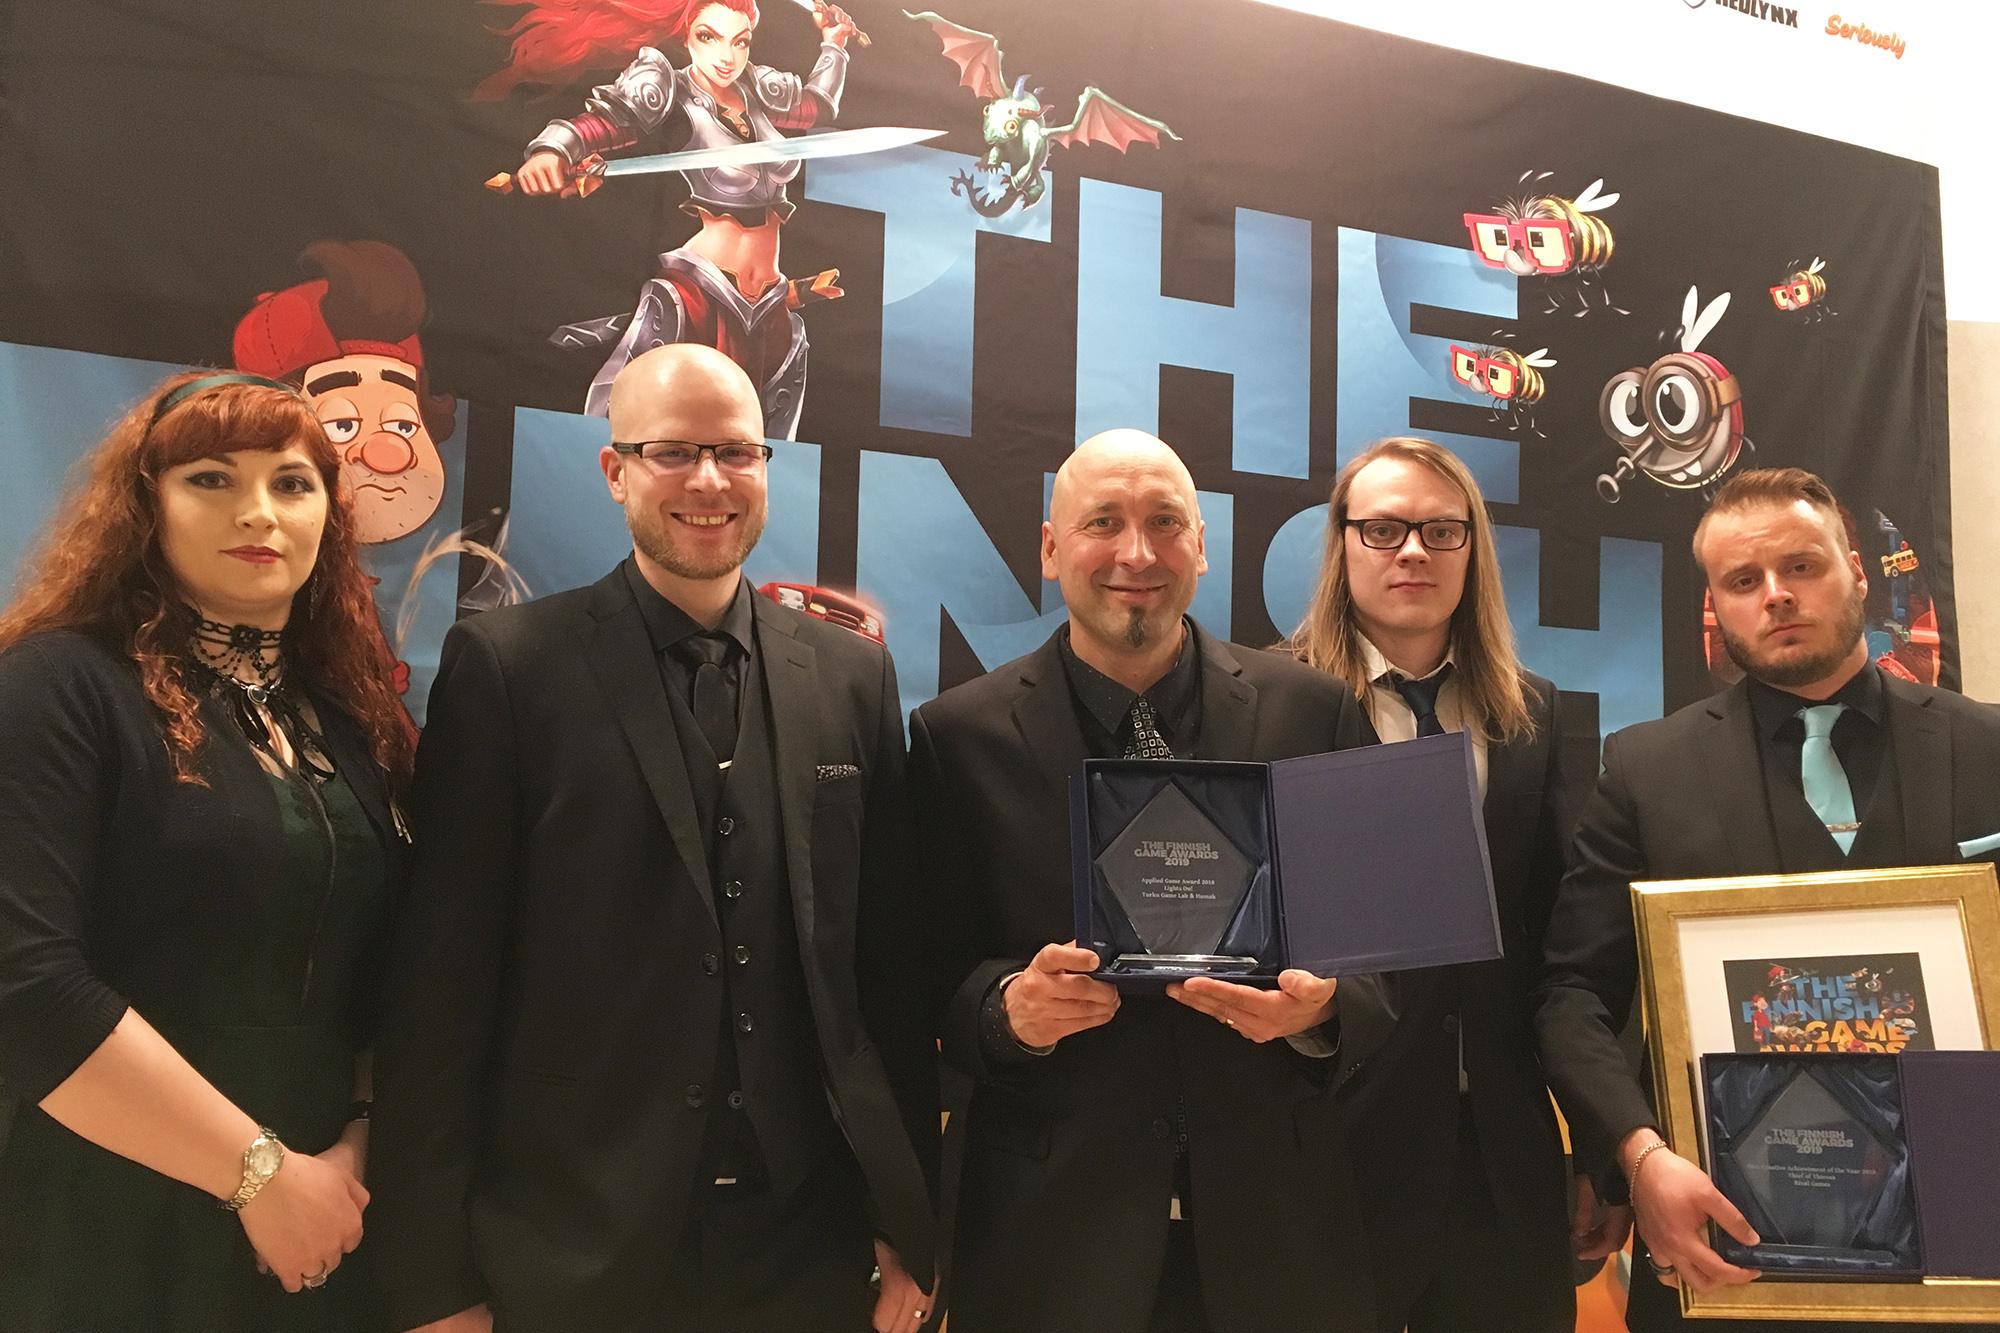 Teams from Turku victorious in Finnish Game Awards 2018